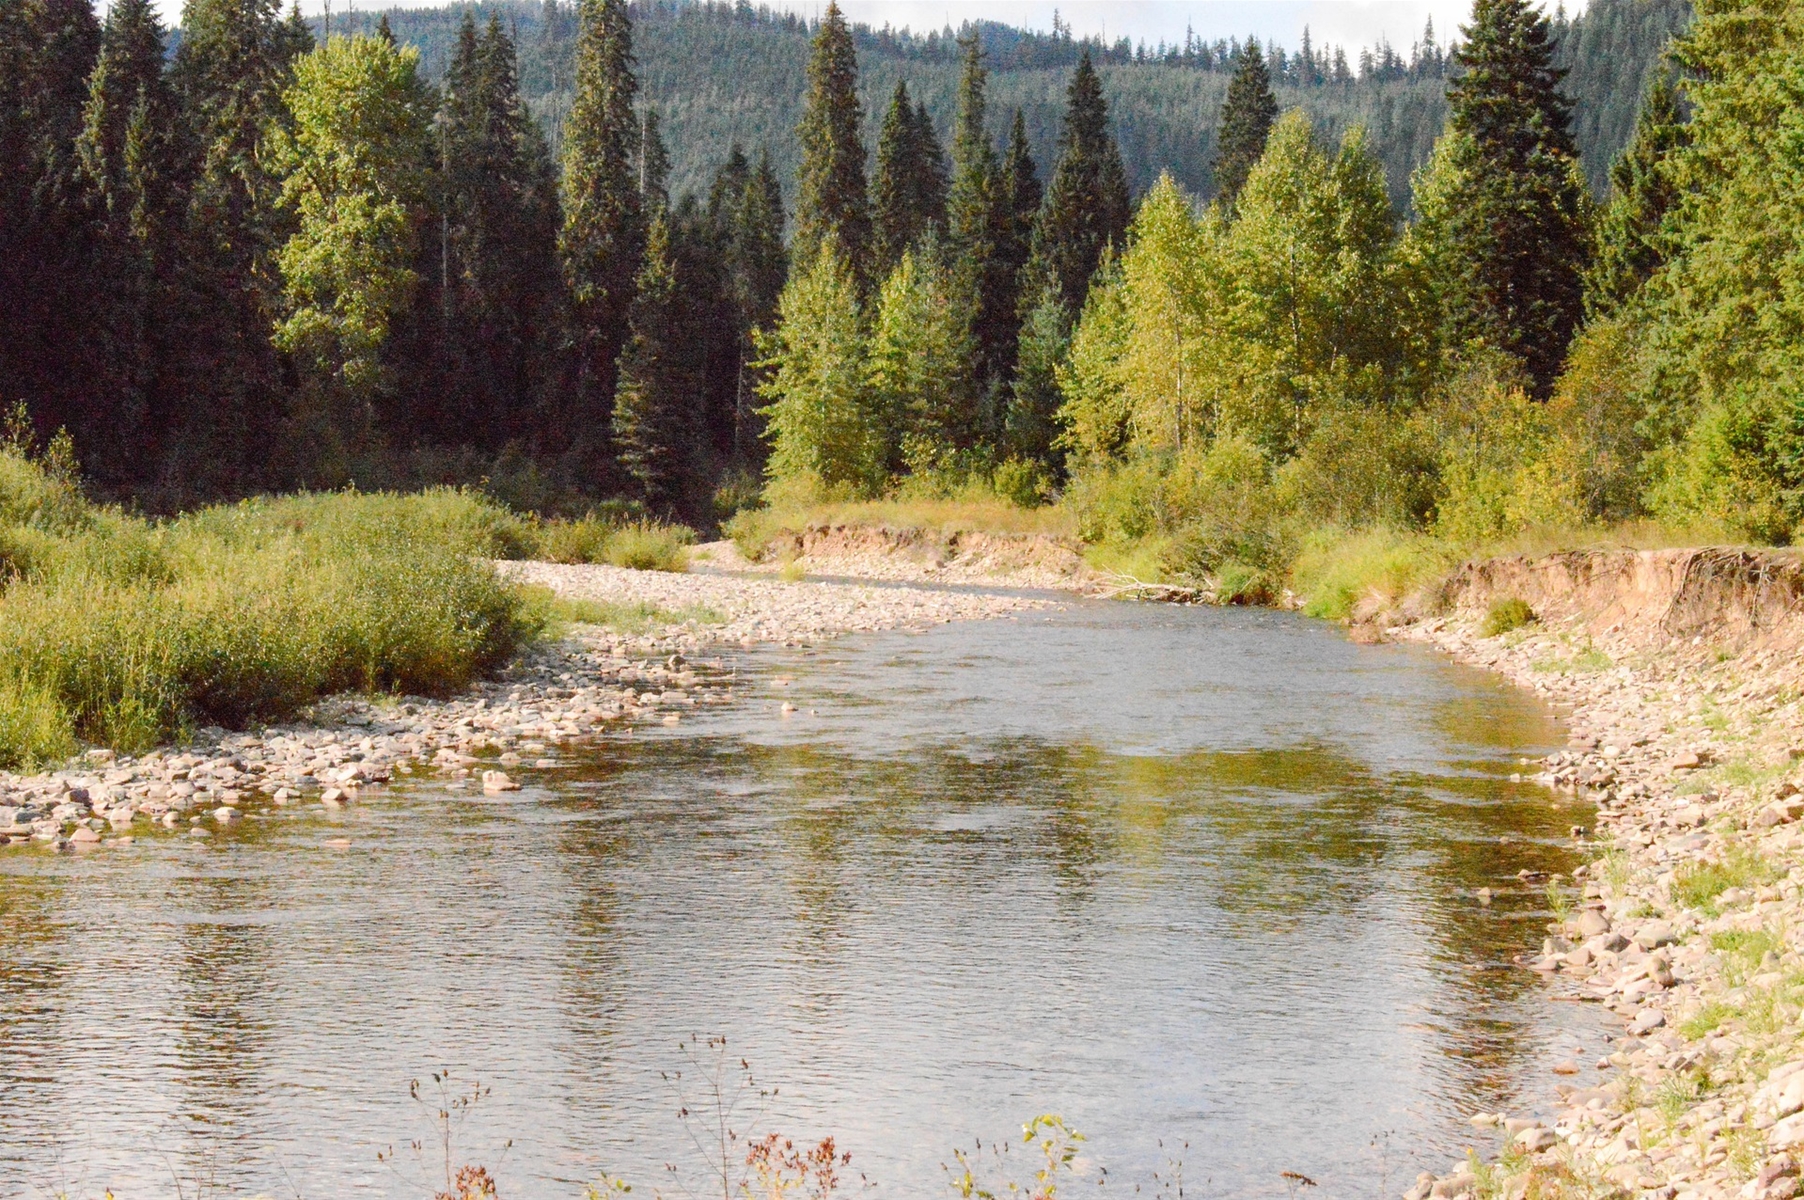 A Flowing River in Summer in the Coeur d'Alene Mountains